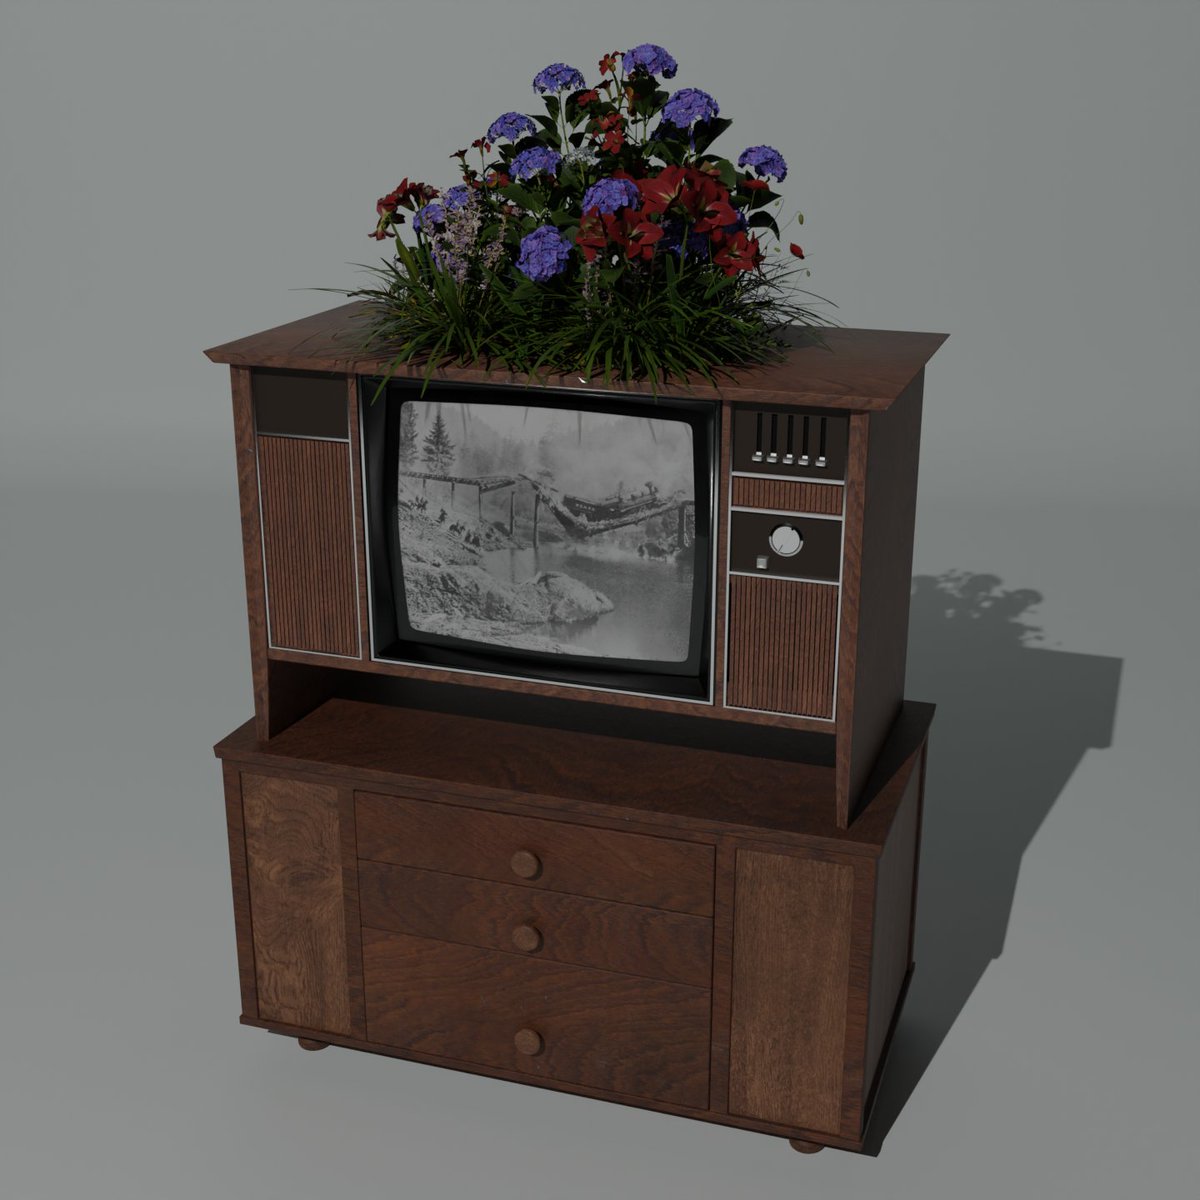 Not 100% complete yet but can anyone name the movie on the TV?
Hint: It's by far the funniest silent film I have ever seen.

#b3d #blender #indiegame #dorothy